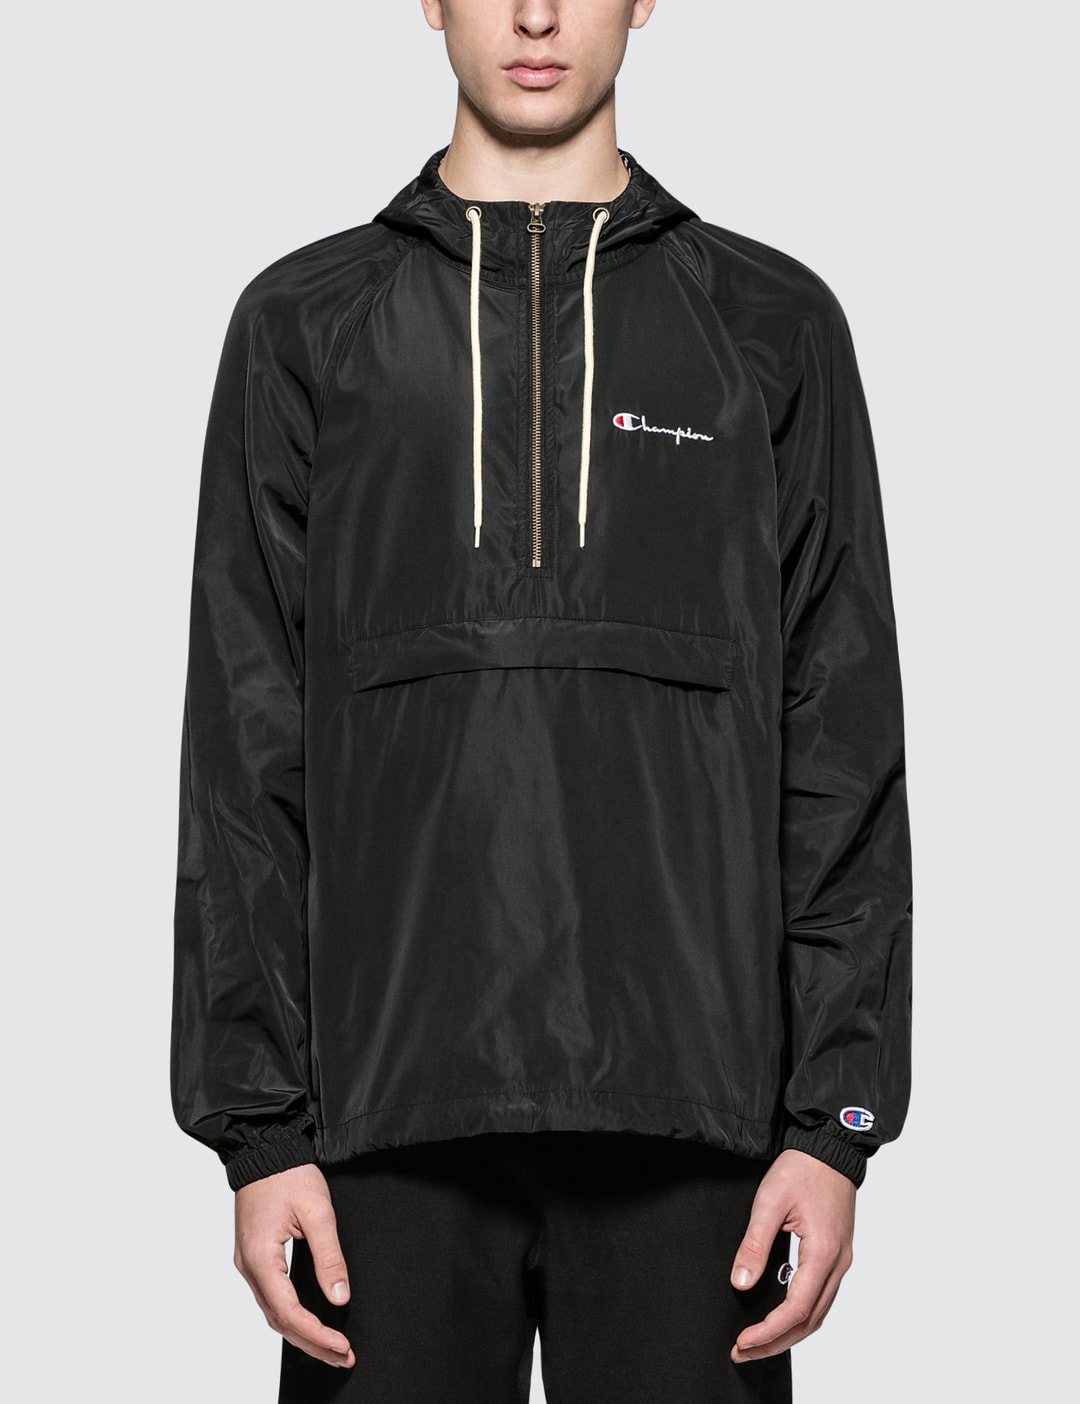 Champion Reverse Weave - Hooded Half Jacket | HBX Globally Curated Fashion and Lifestyle